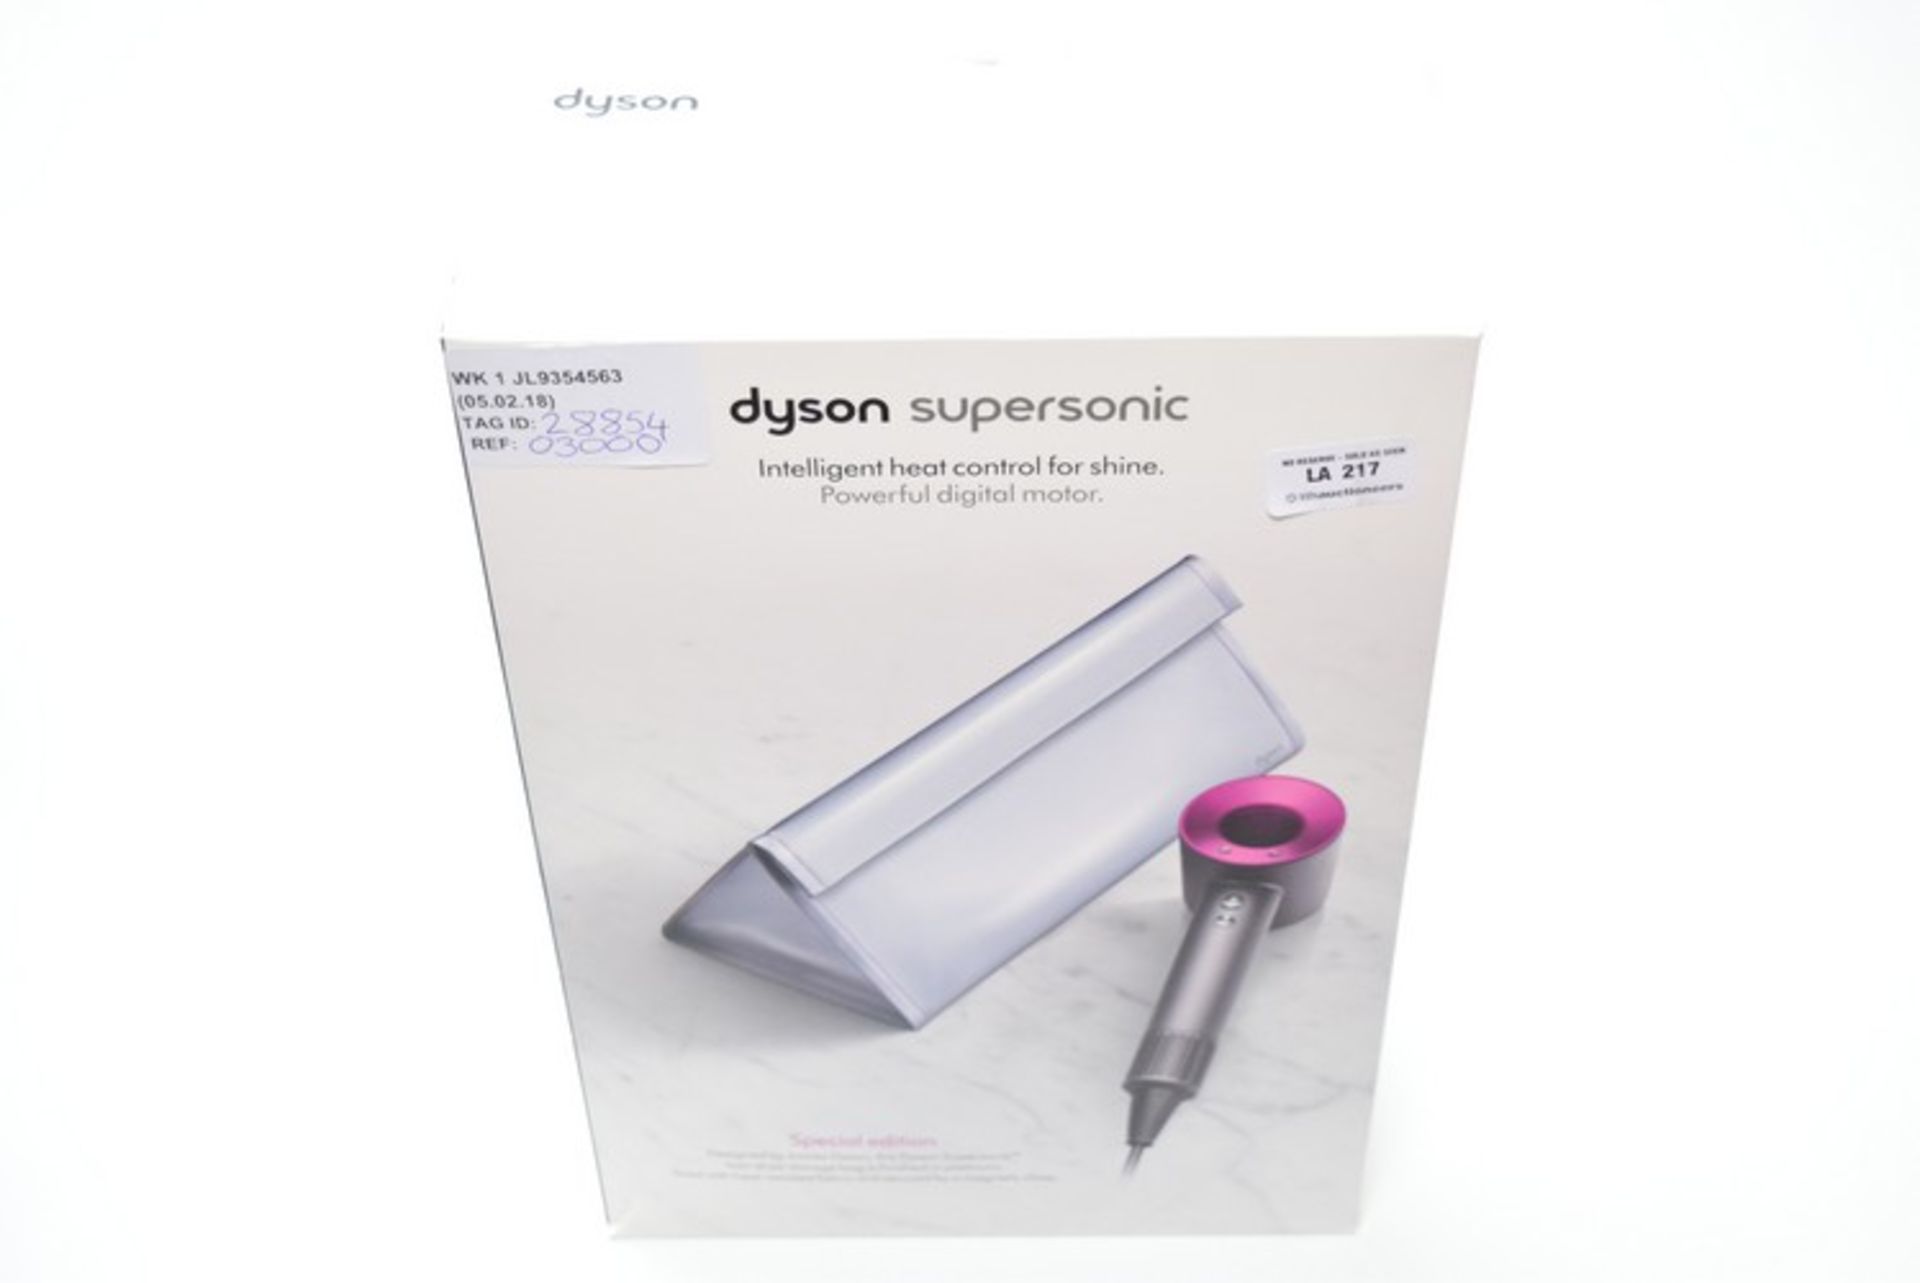 1 x BOXED DYSON SUPER SONIC HAIR DRYER RRP £300 05.02.18 28854 *PLEASE NOTE THAT THE BID PRICE IS